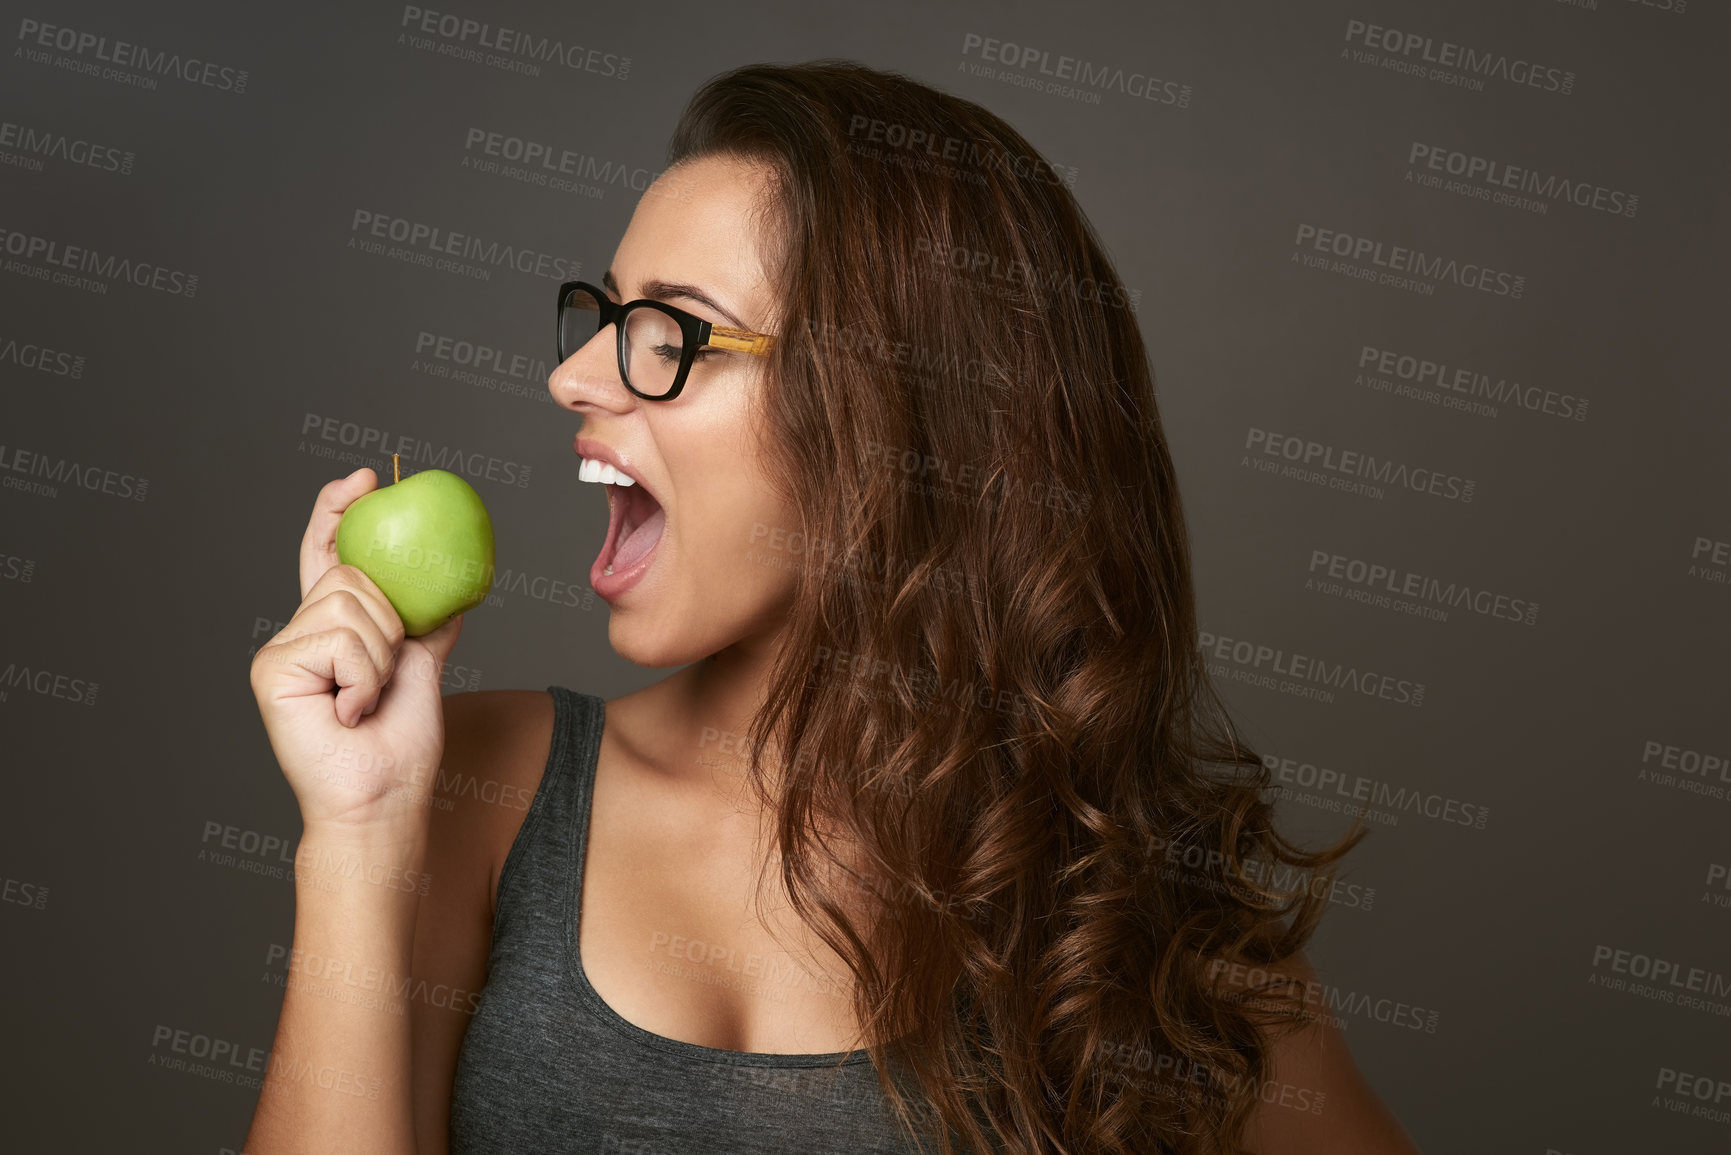 Buy stock photo Studio shot of a beautiful young woman about to bite an apple against a brown background